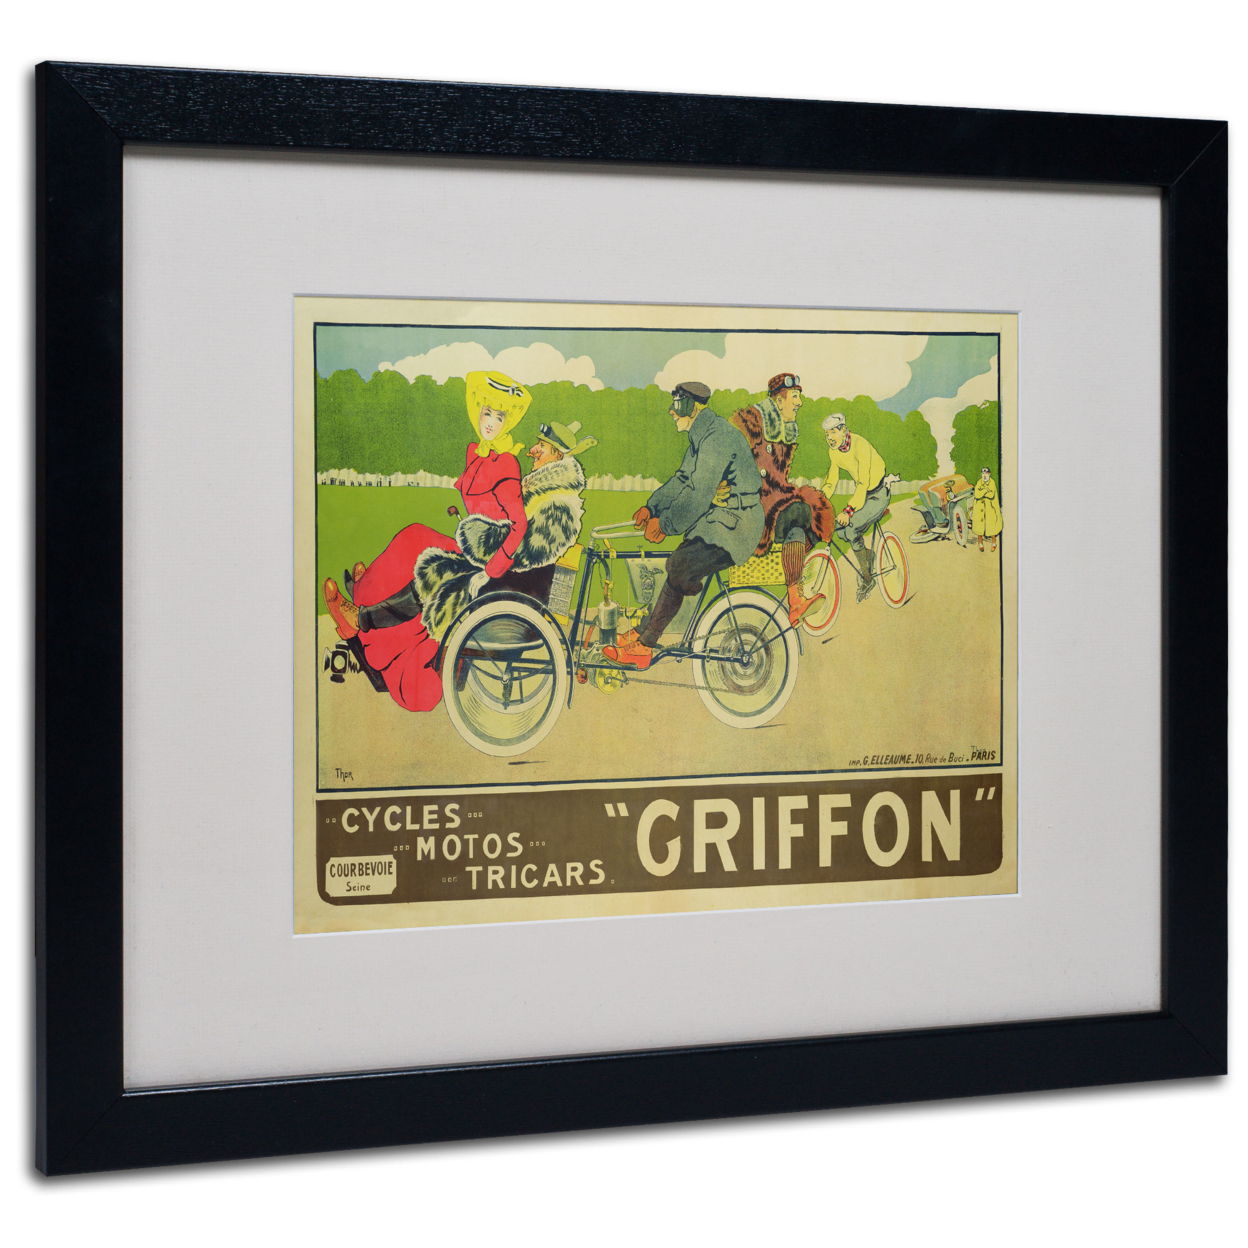 Walter Thor 'Griffon Cycles & Motors' Black Wooden Framed Art 18 X 22 Inches